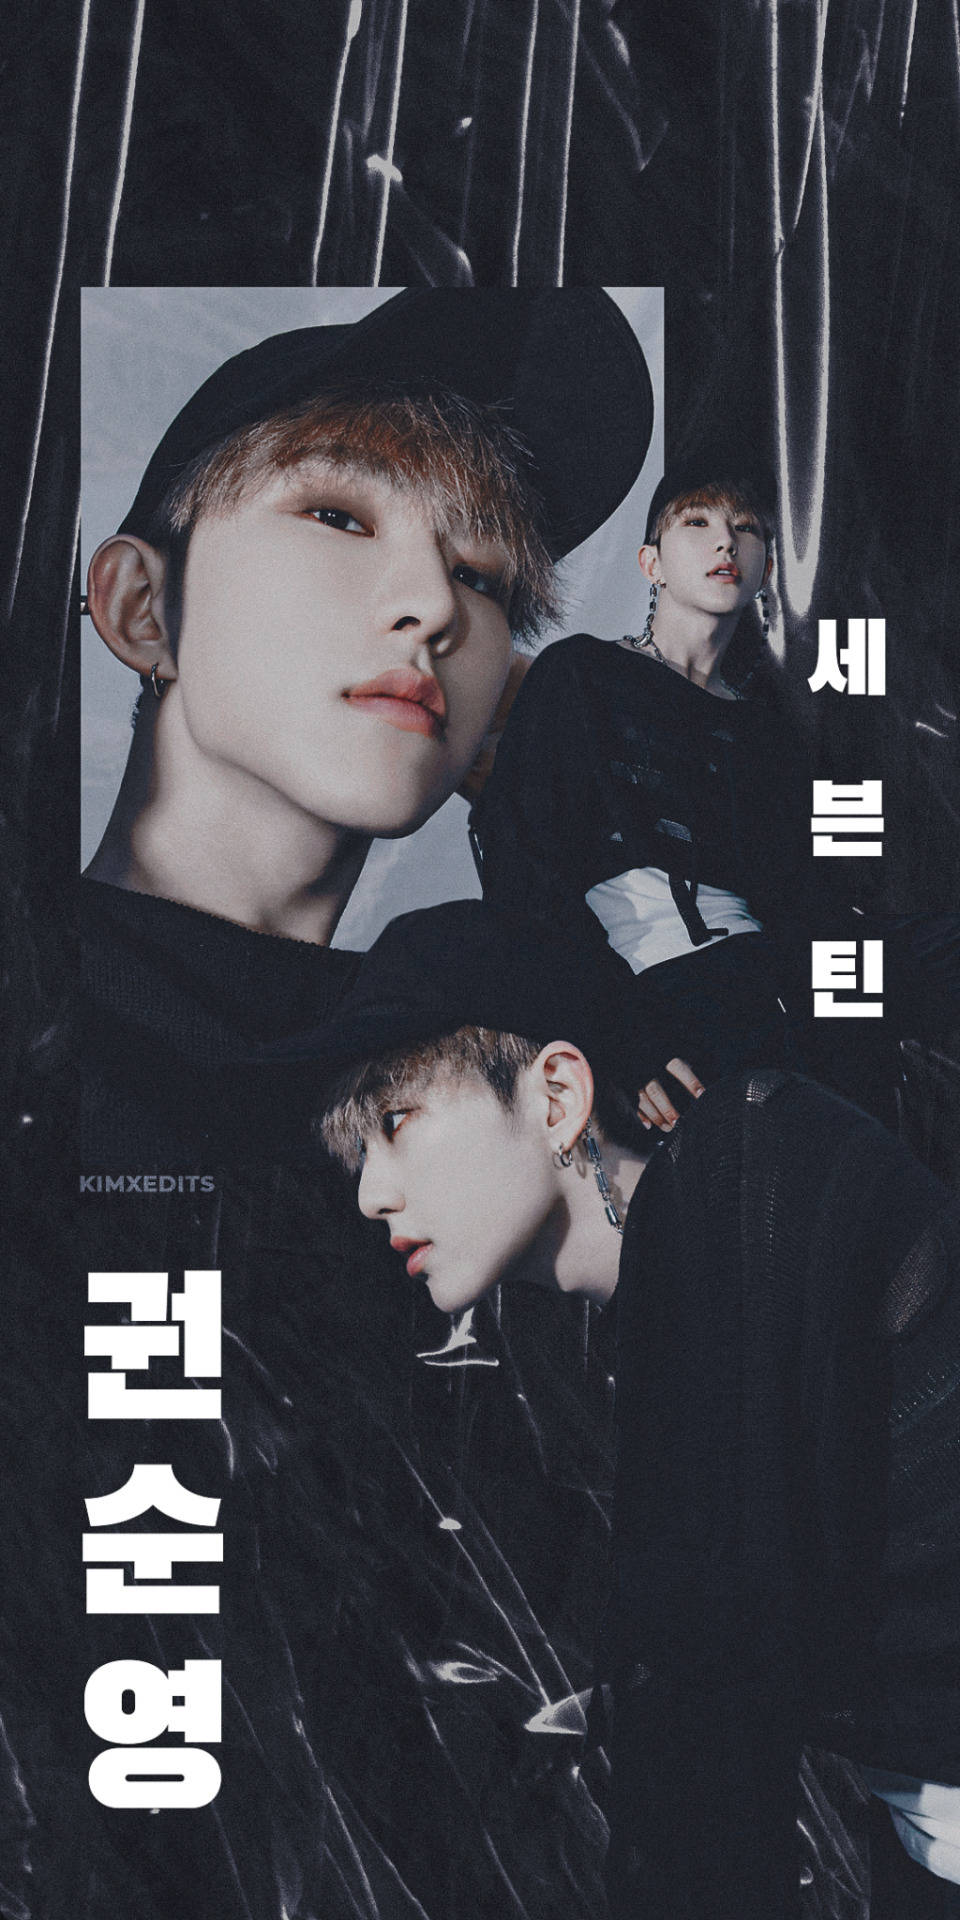 Hoshi In Black Outfit Background